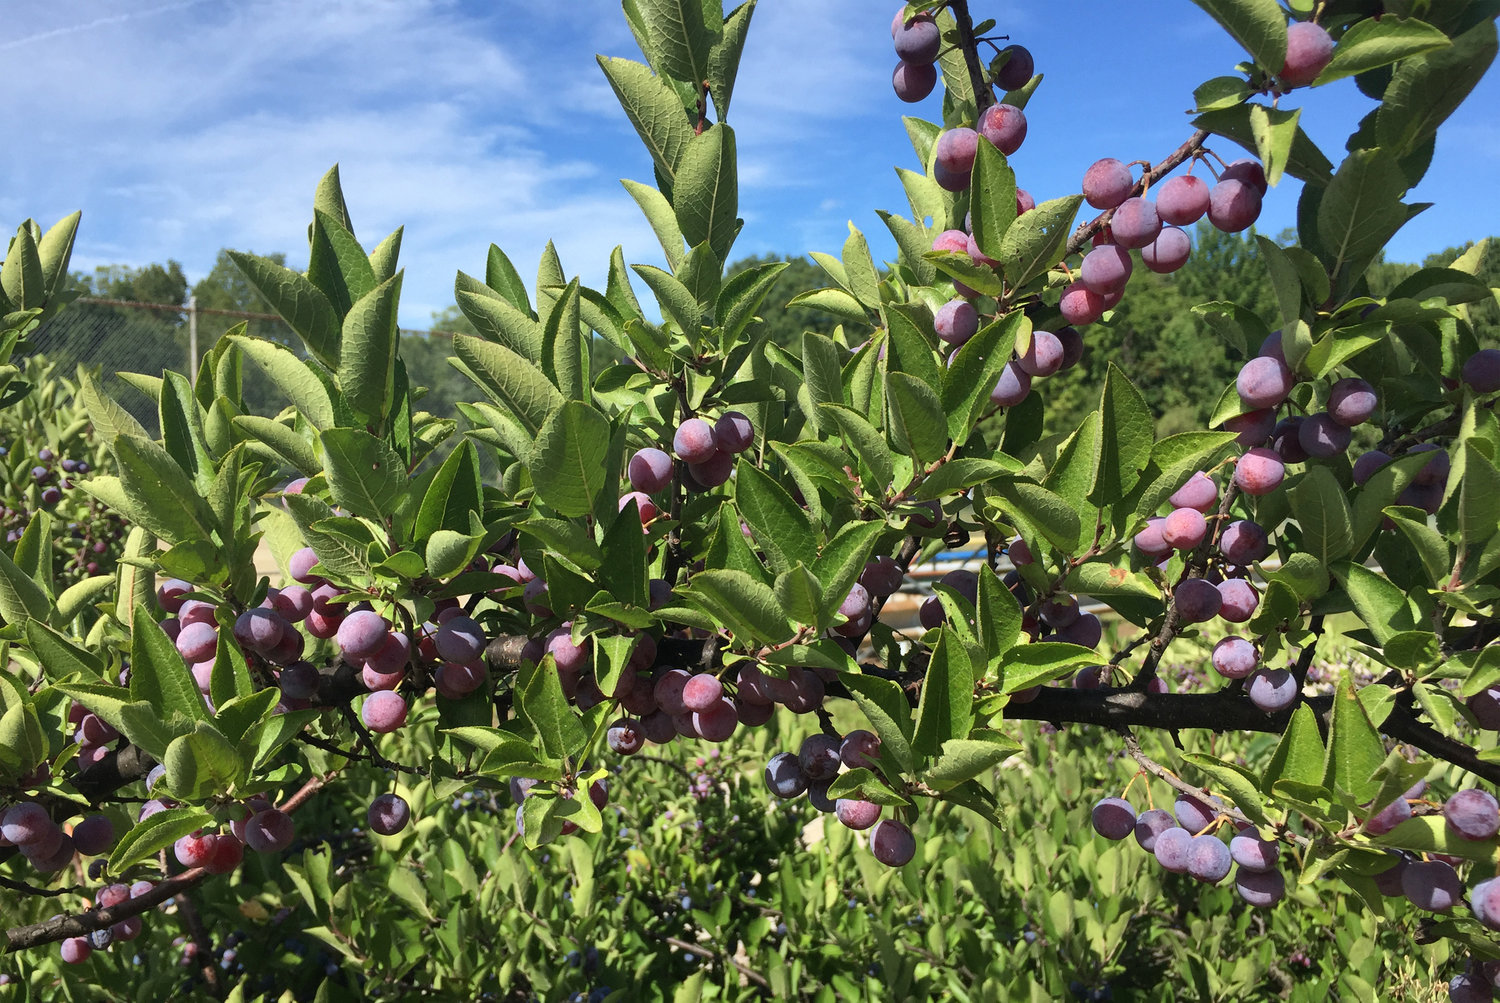 A North Smithfield nursery cultivating beach plum trees and more